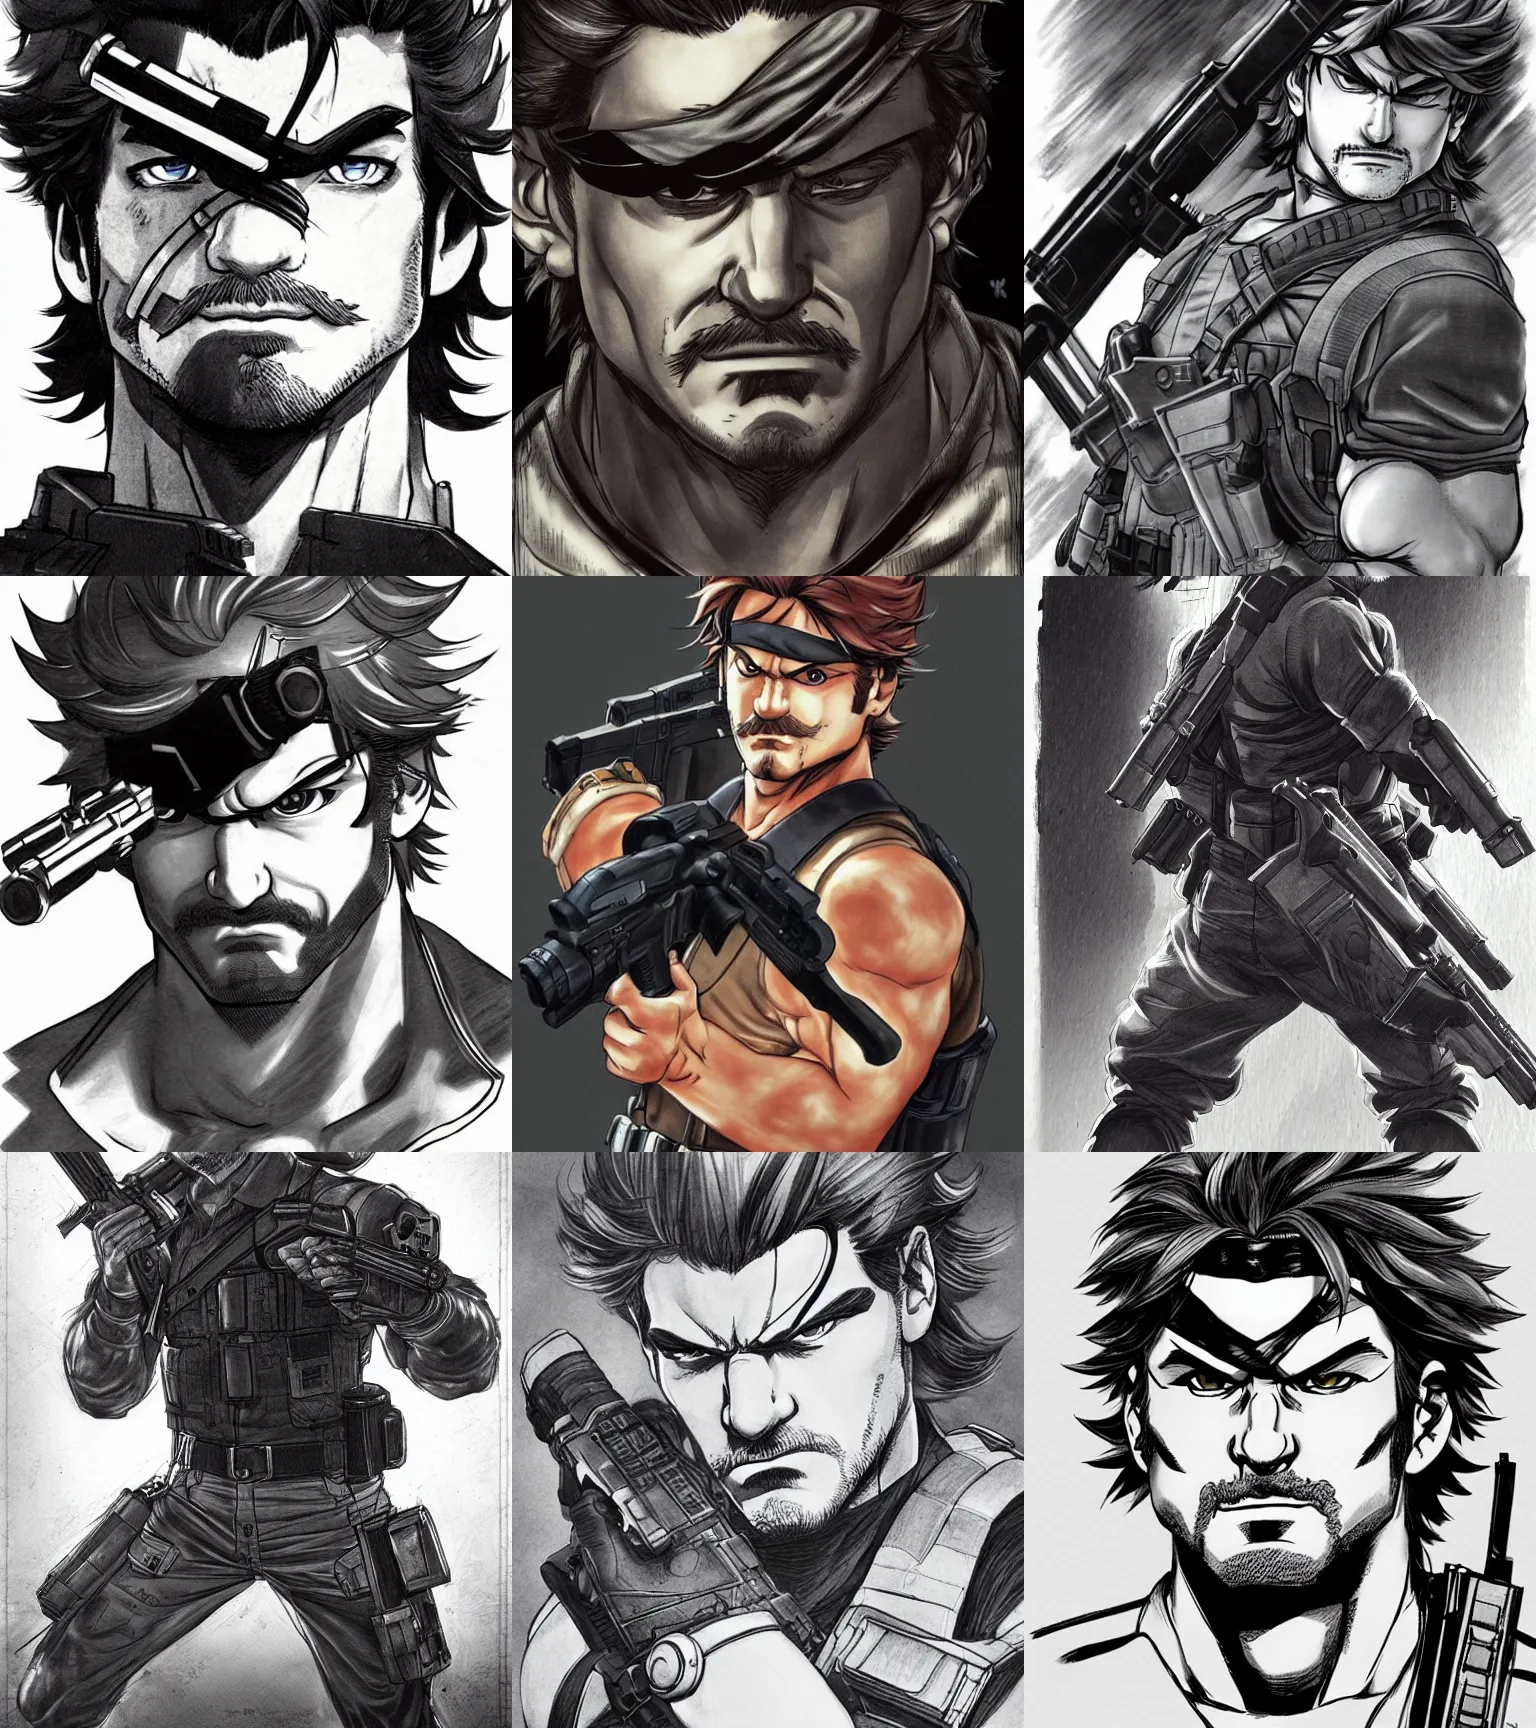 Prompt: portrait mario solid snake by yusuke murata and masakazu katsura, holding a gun, artstation, highly - detailed, cgsociety, pencile and ink, city in the background, dark colors, intricate details